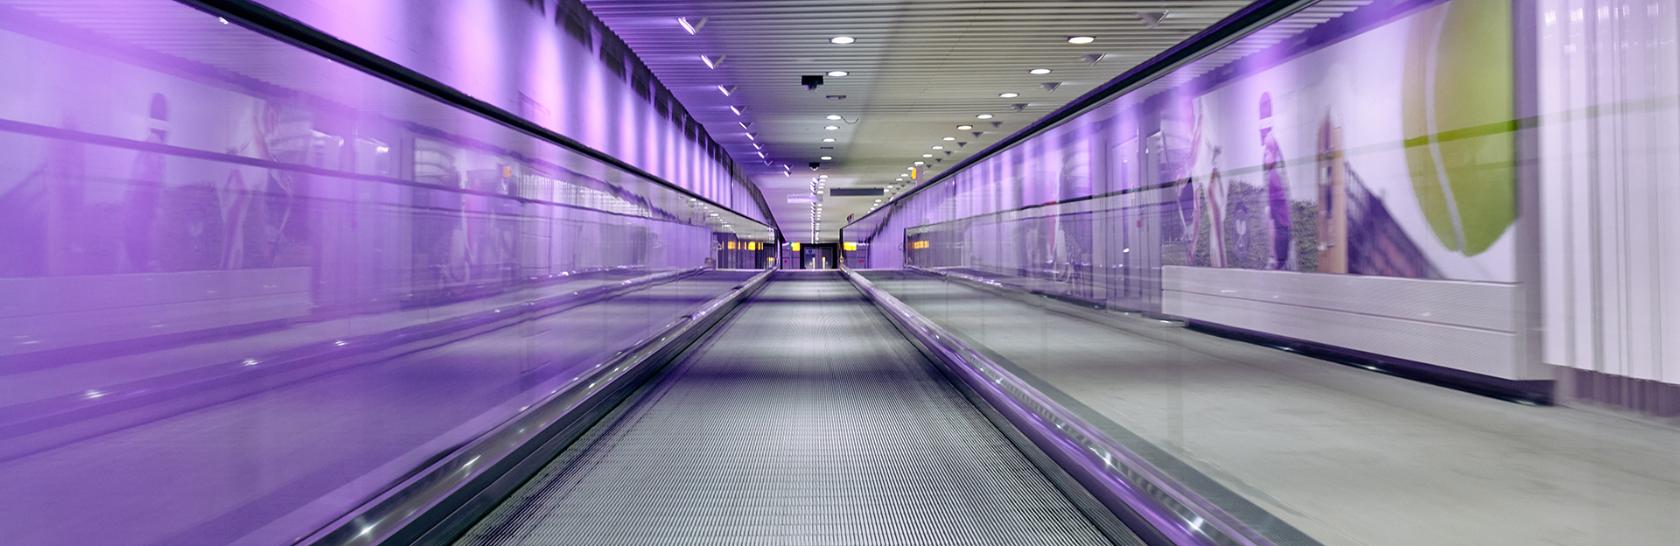 A guide to London Heathrow Airport (LHR)